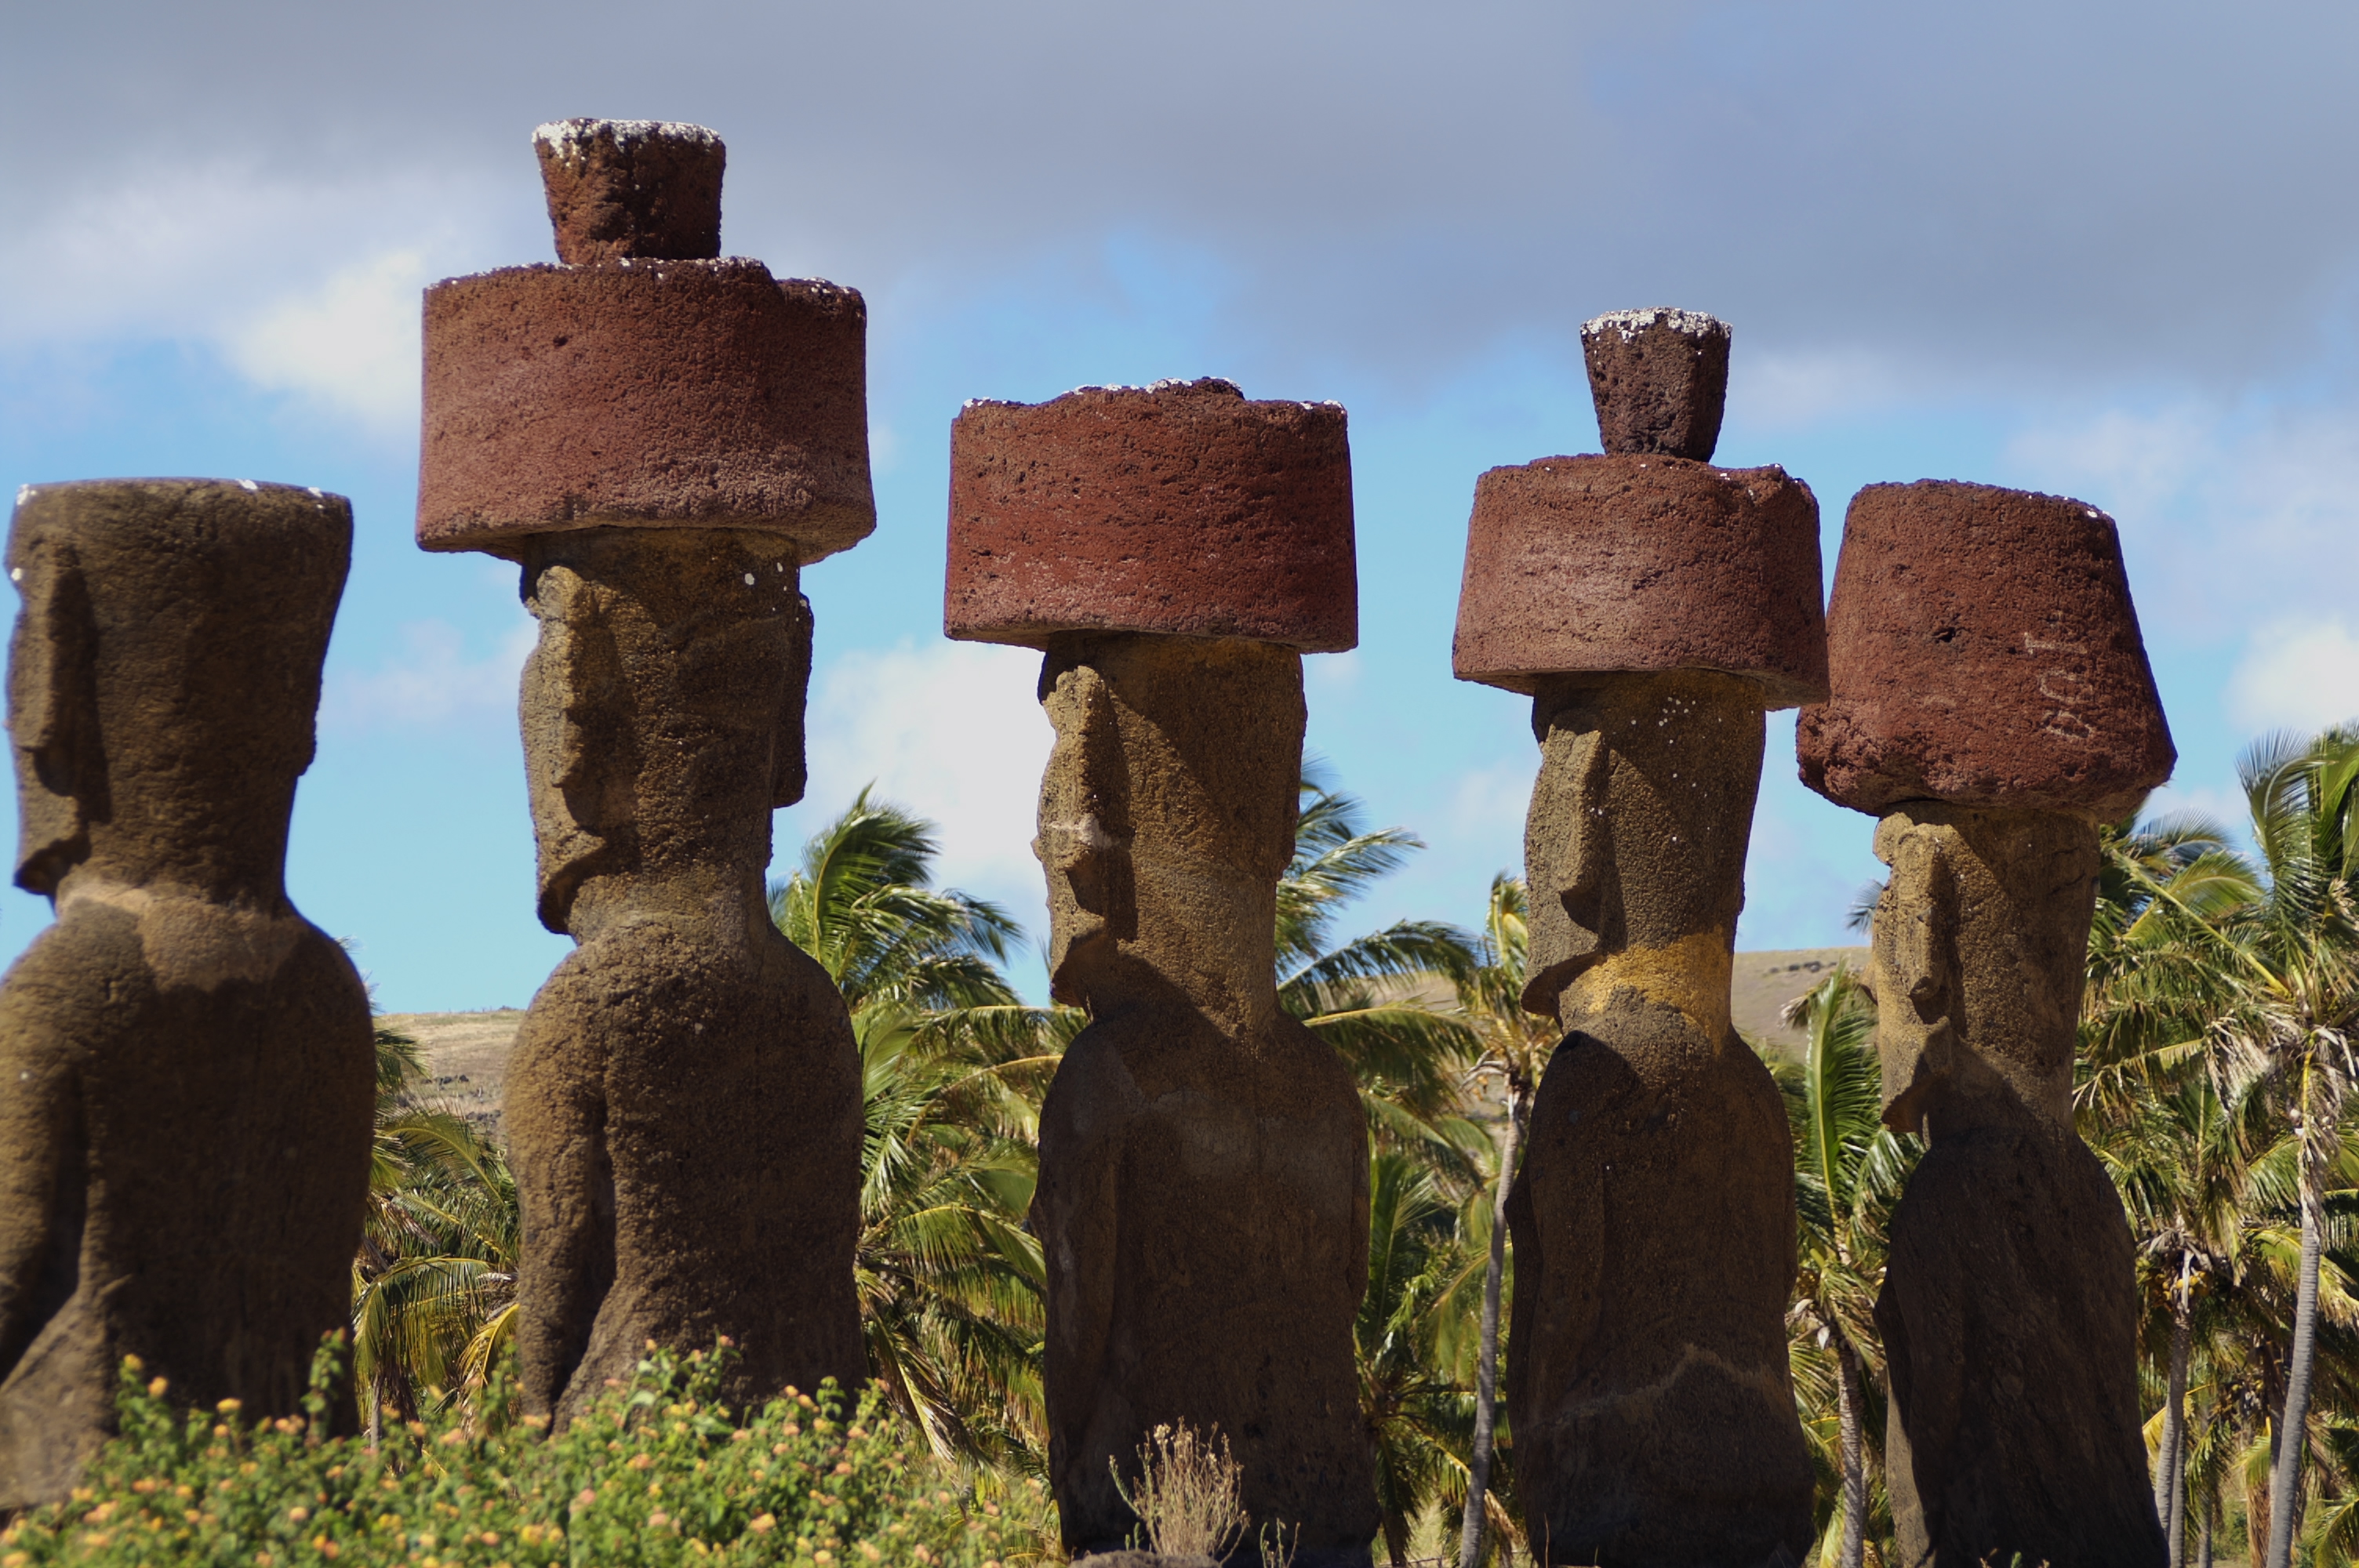 Moais in Easter Island, photo by Pixxtaker, Flickr, CC BY-NC-ND 2.0